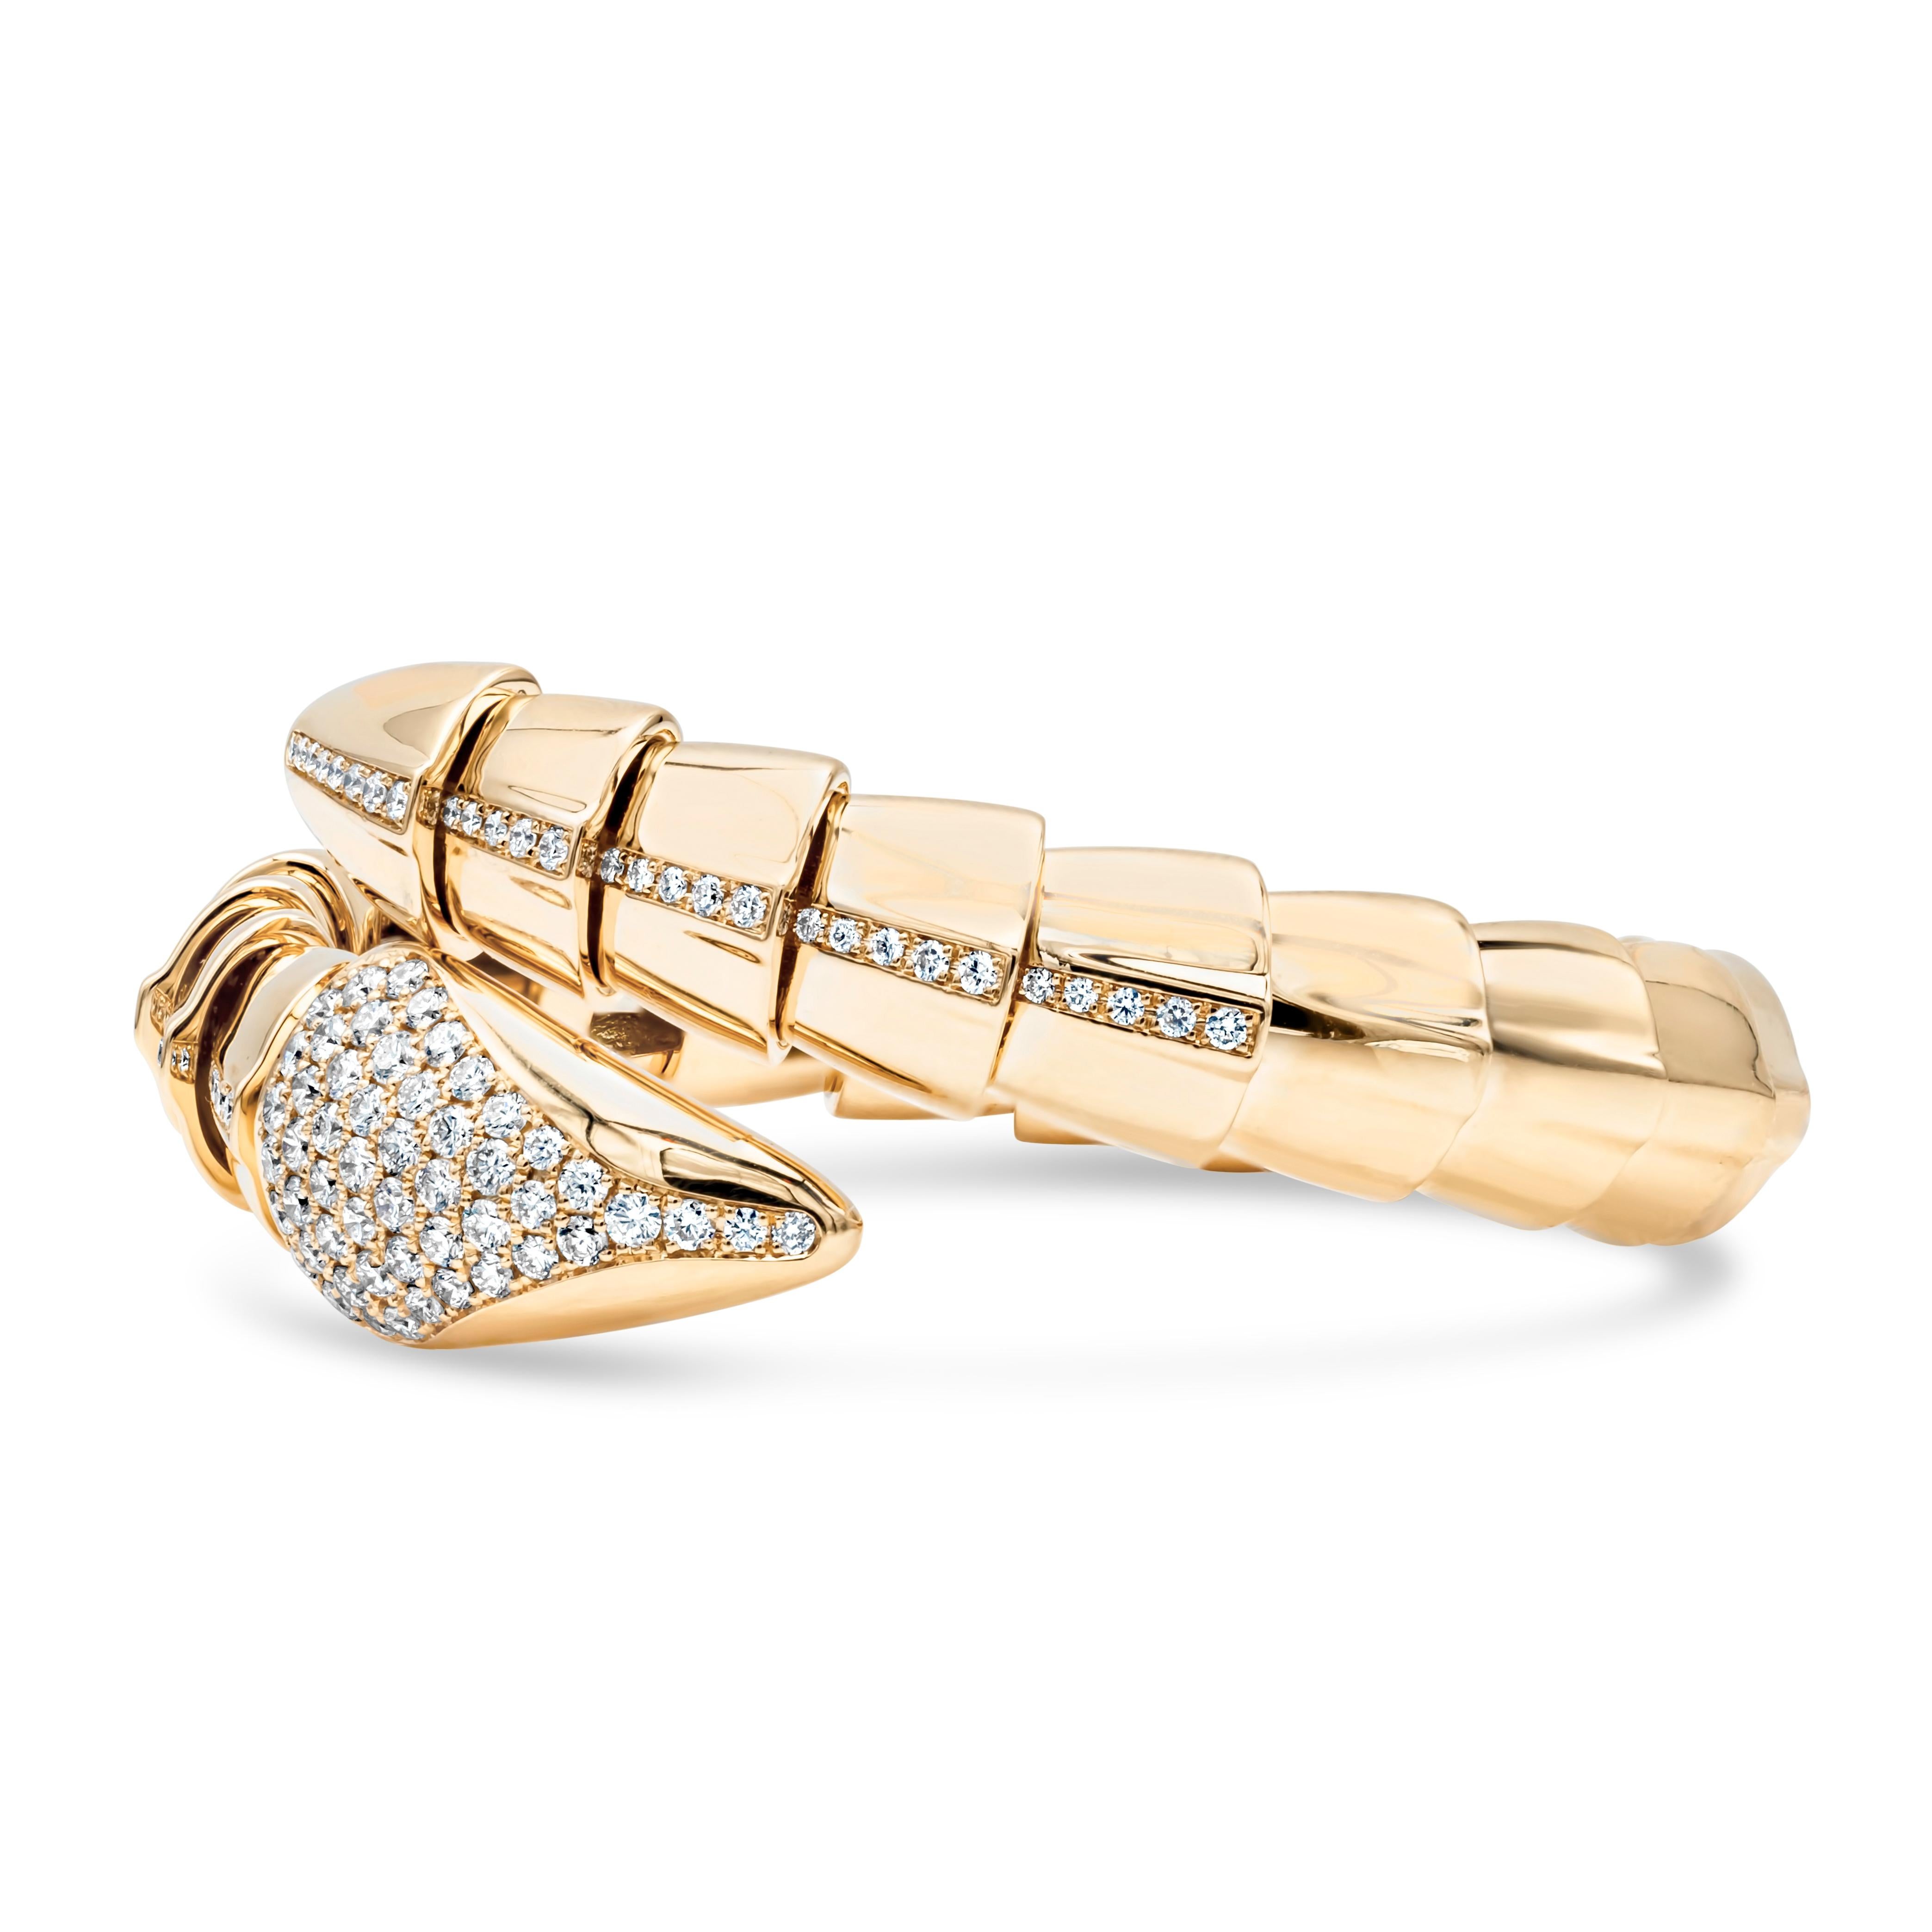 An artistic and high-quality bangle bracelet, featuring a serpentine motif made with 18K yellow gold. Beautifully accented with 100 round brilliant cut diamonds weighing 1.74 carats with F color and VS-SI clarity. Perfect jewelry to accompany any